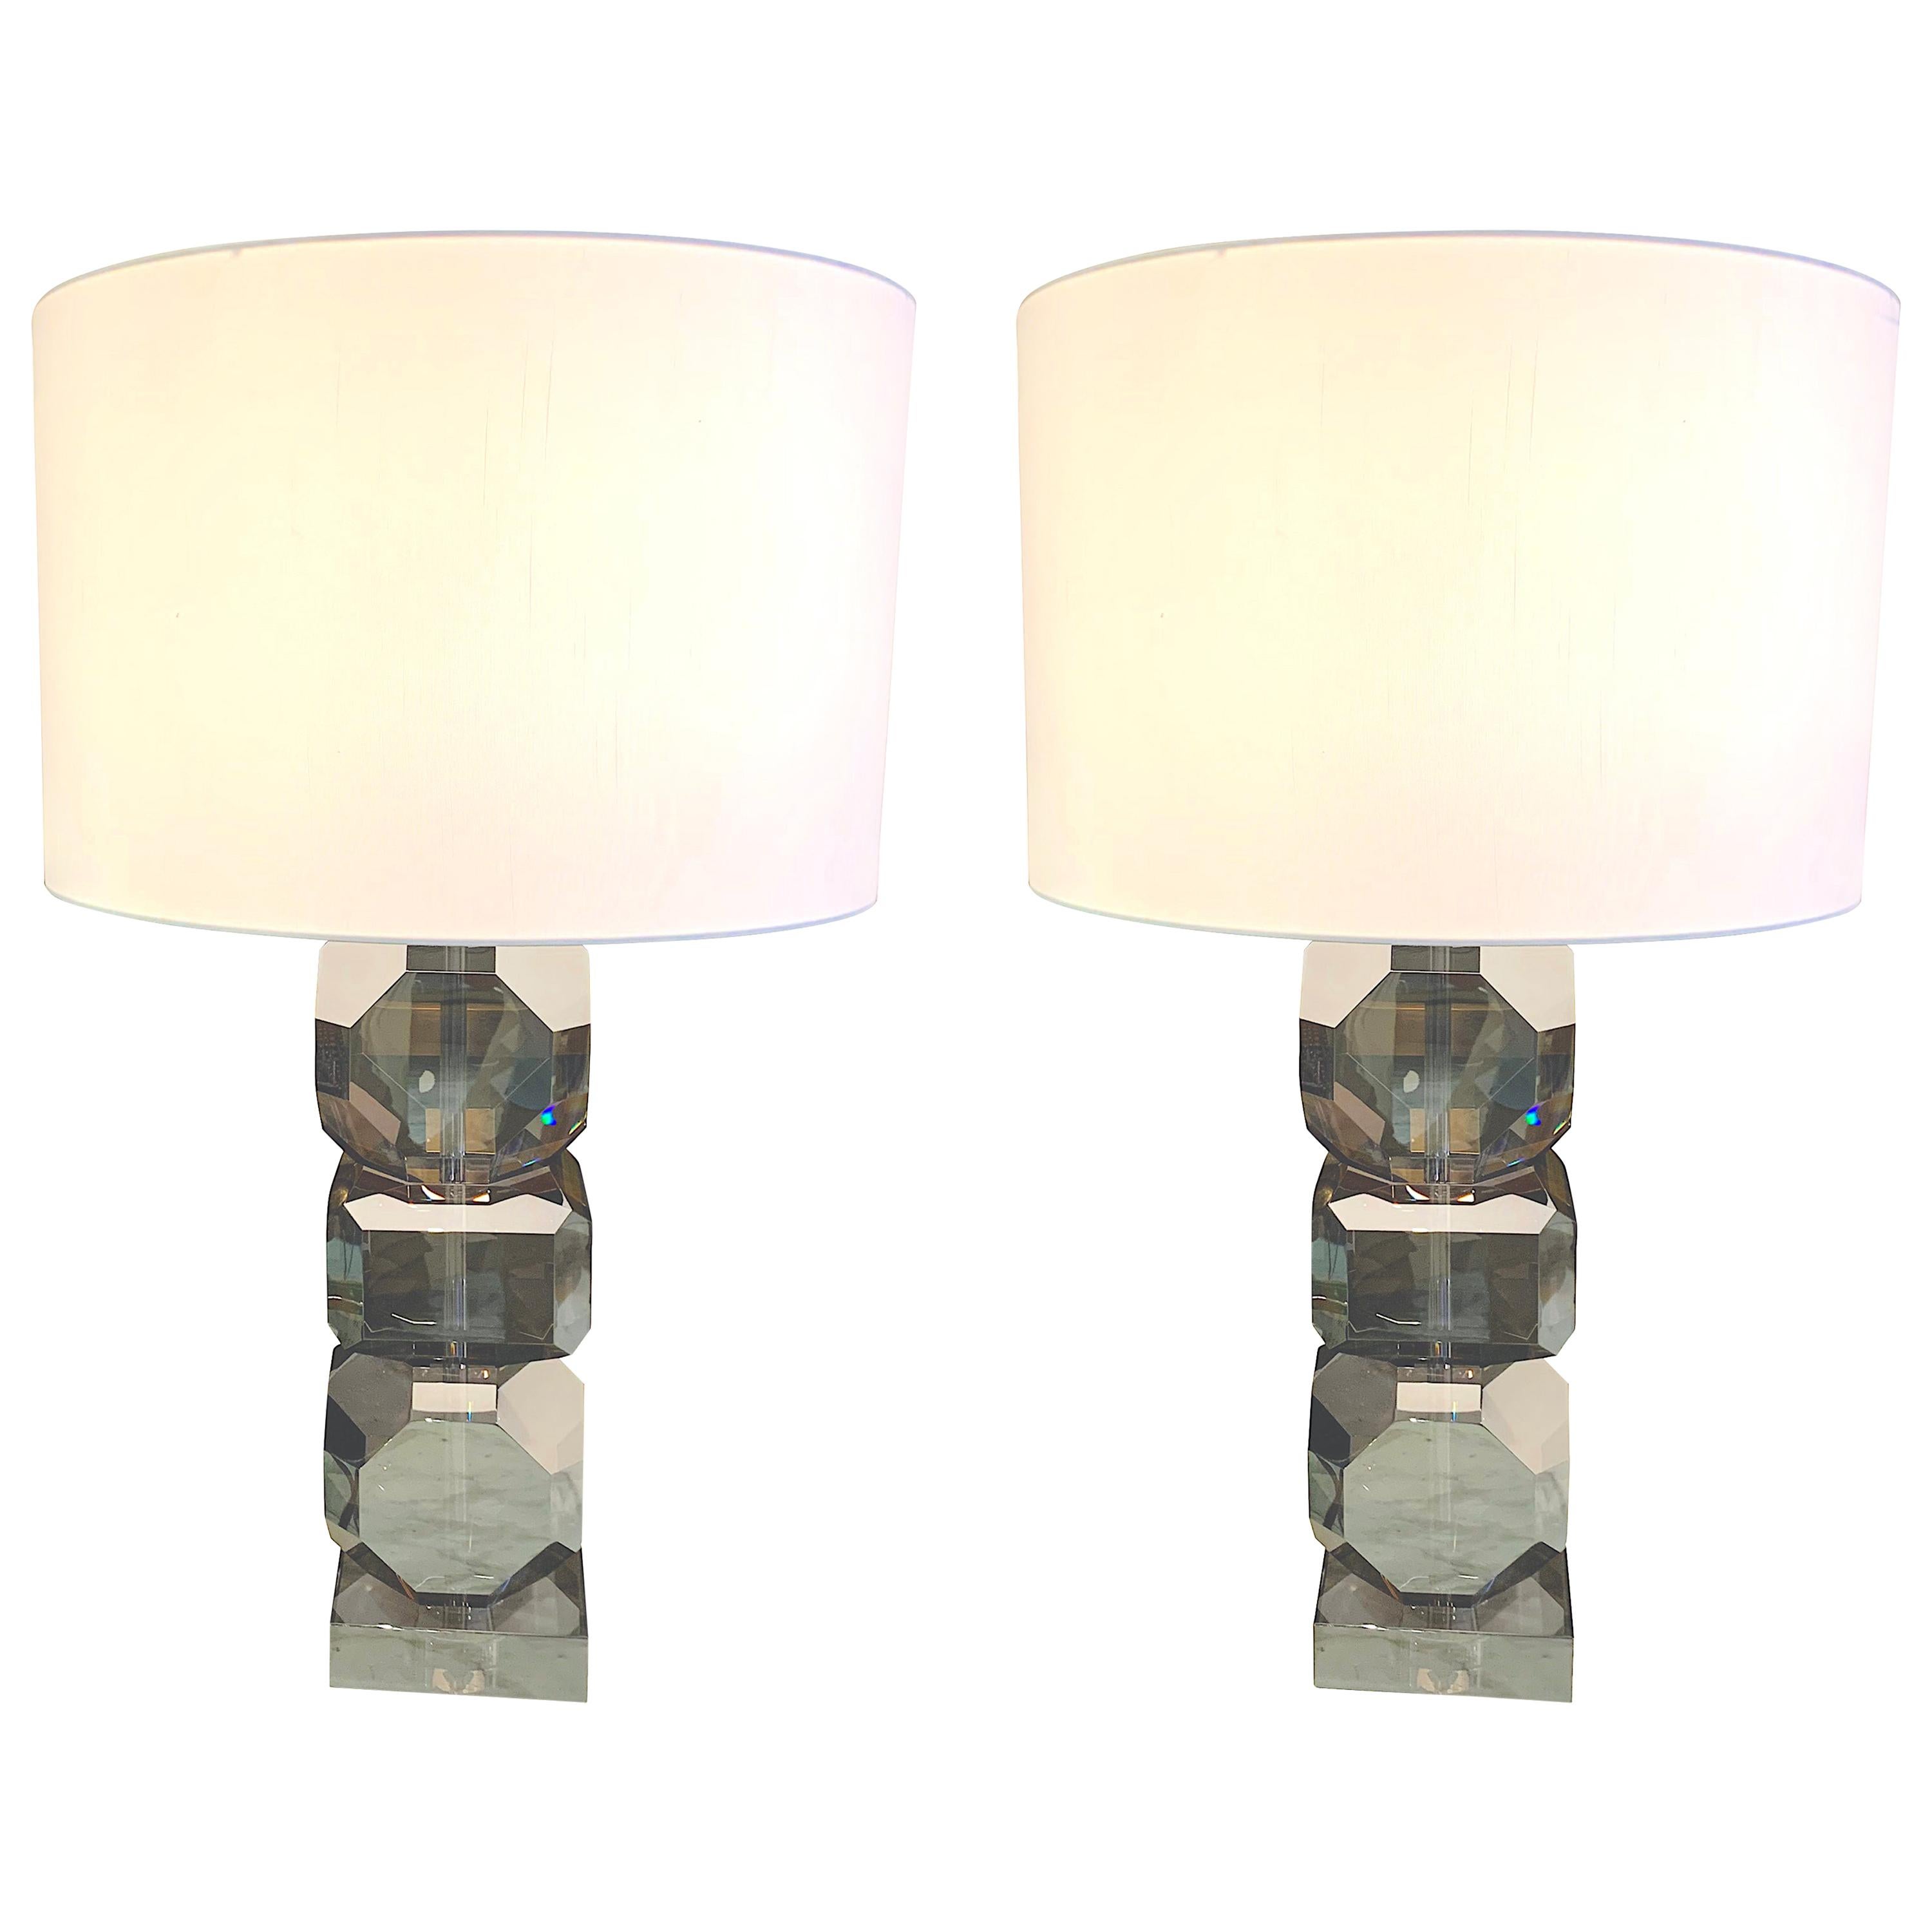 Smoked Cut Crystal Stacked Cubes Design Pair of Lamps, Dutch, Contemporary